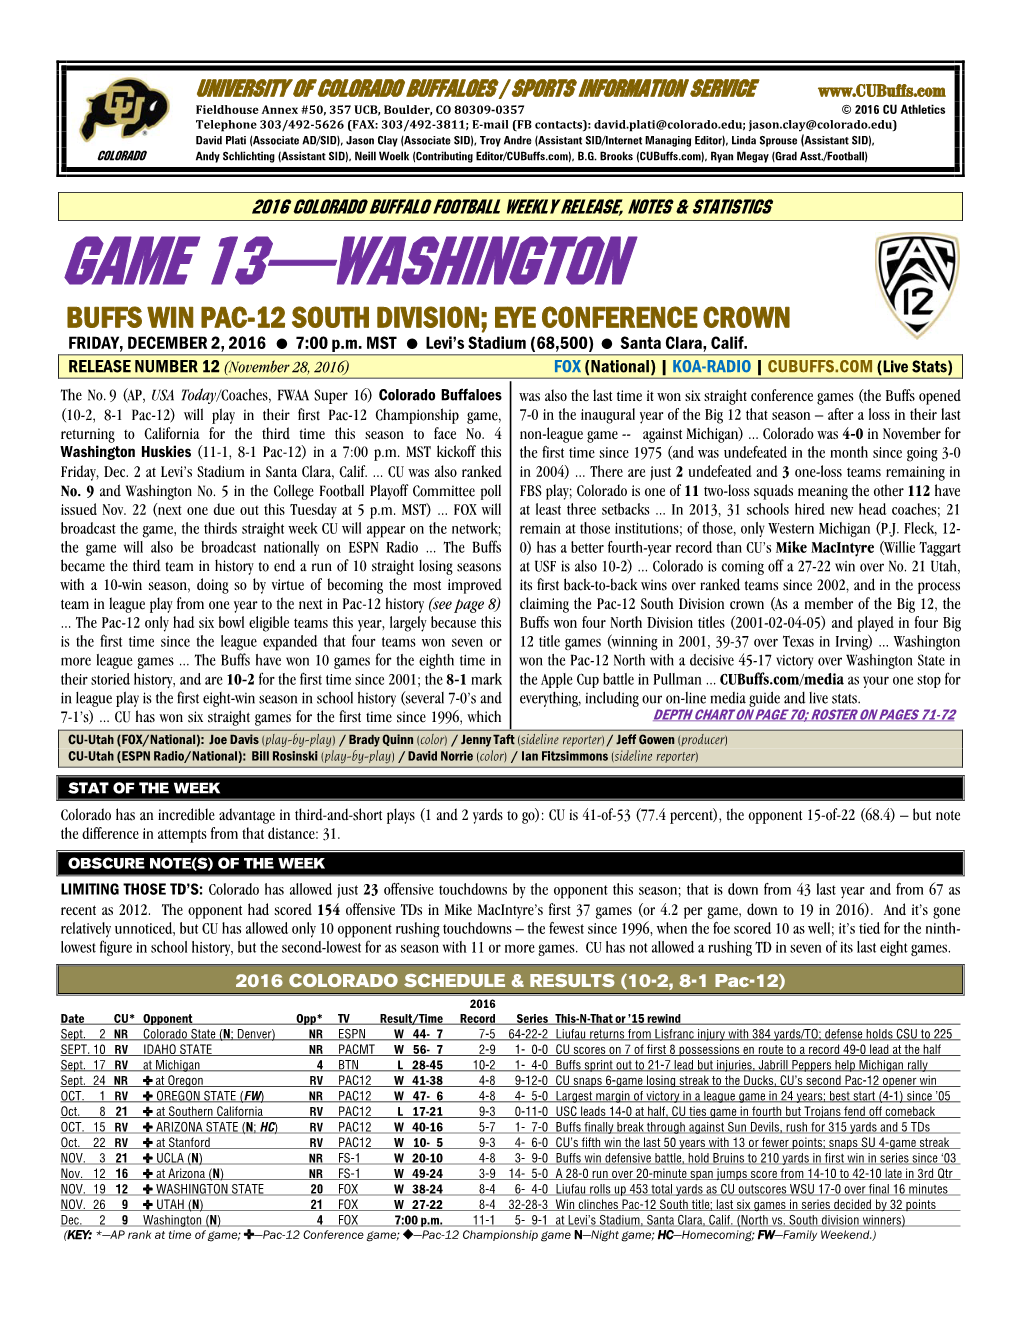 GAME 13—WASHINGTON BUFFS WIN PAC-12 SOUTH DIVISION; EYE CONFERENCE CROWN FRIDAY, DECEMBER 2, 2016 7:00 P.M